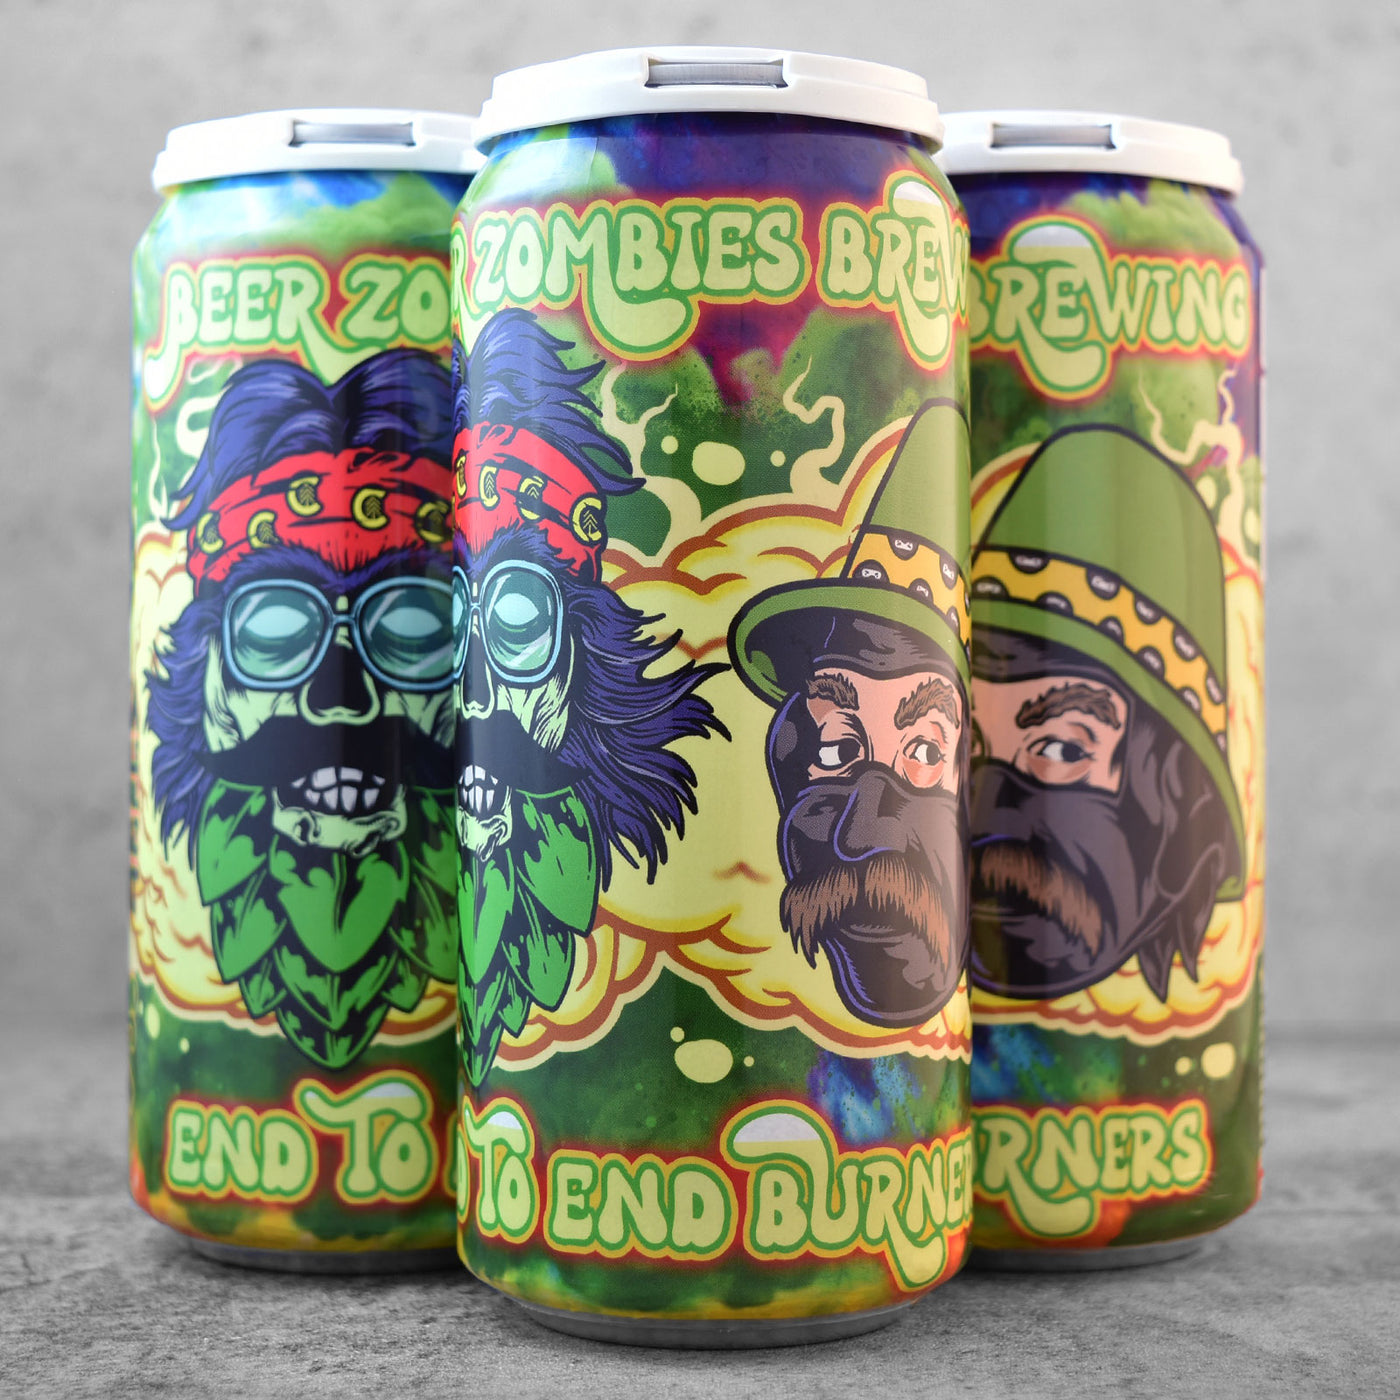 Beer Zombies End To End Burners